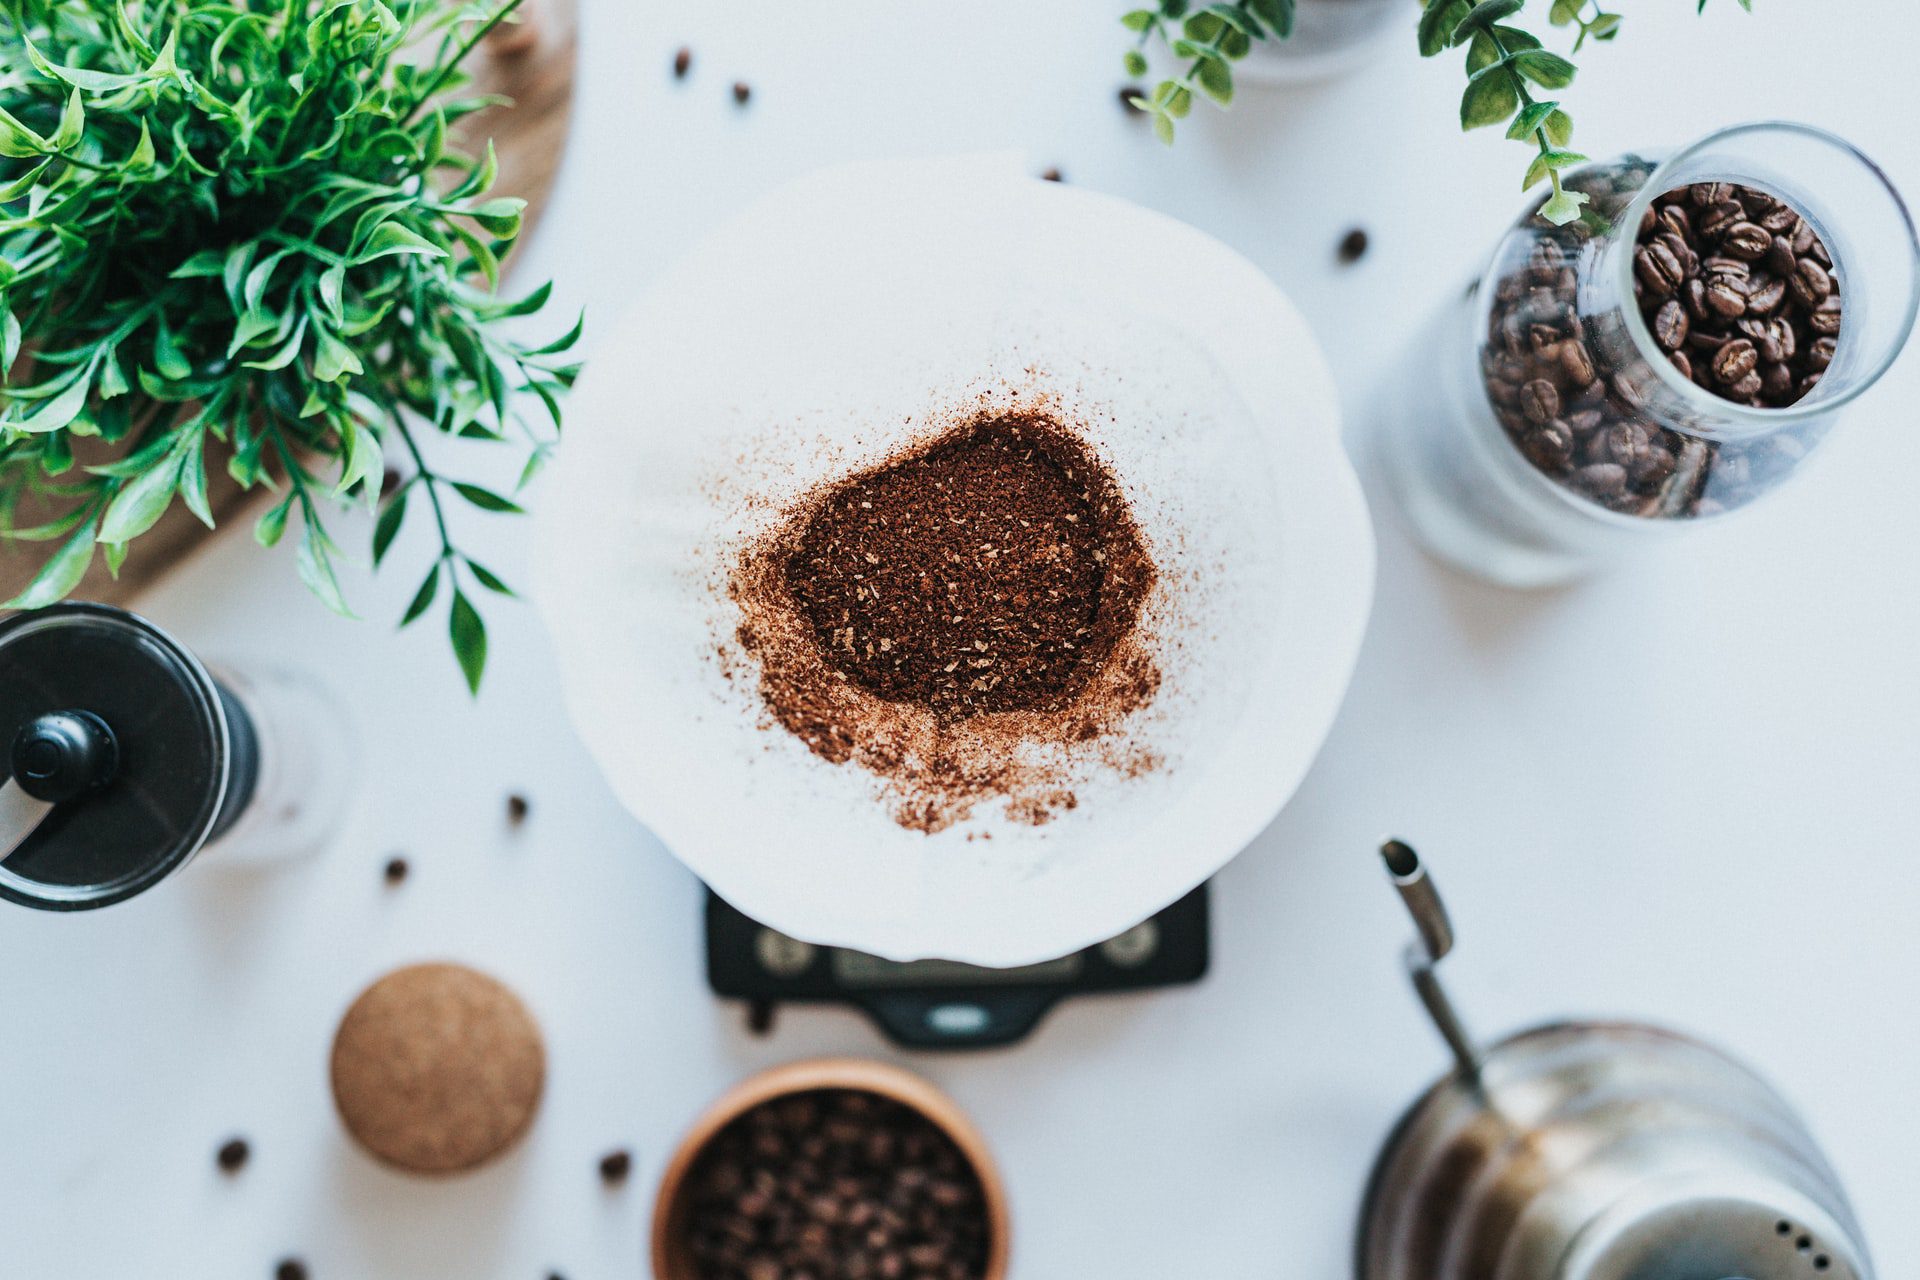 5 reasons to use coffee as fertilizer for your plants